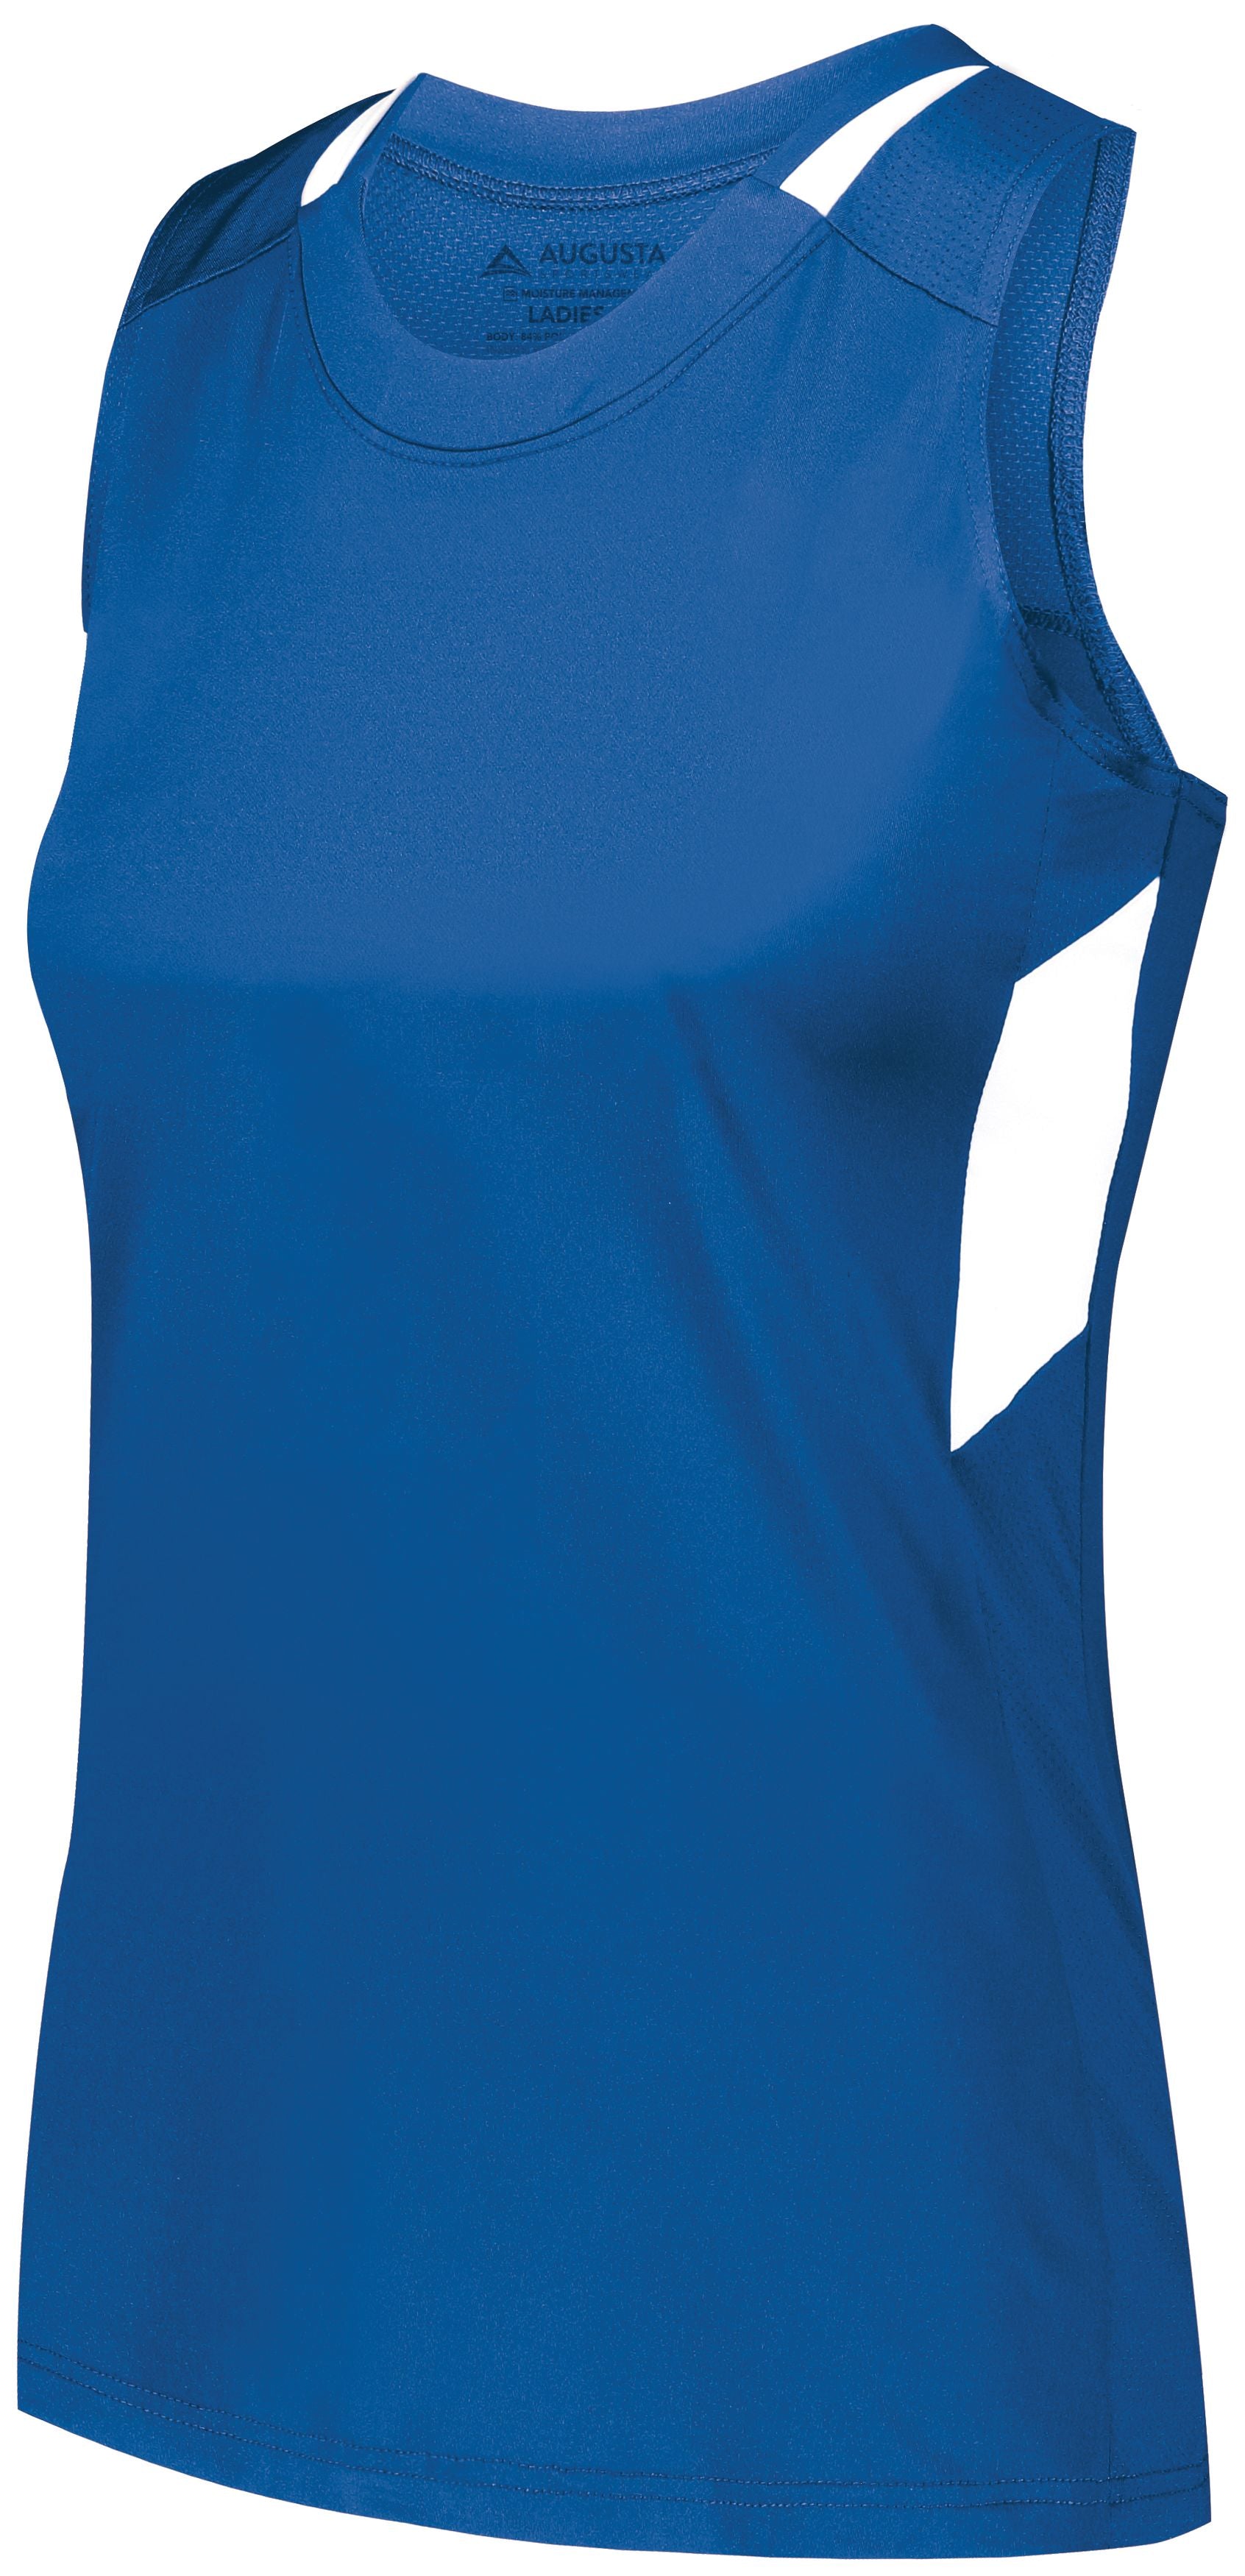 Augusta Sportswear Ladies Crossover Tank in Royal/White  -Part of the Ladies, Ladies-Tank, Augusta-Products, Lacrosse, Shirts, All-Sports, All-Sports-1 product lines at KanaleyCreations.com